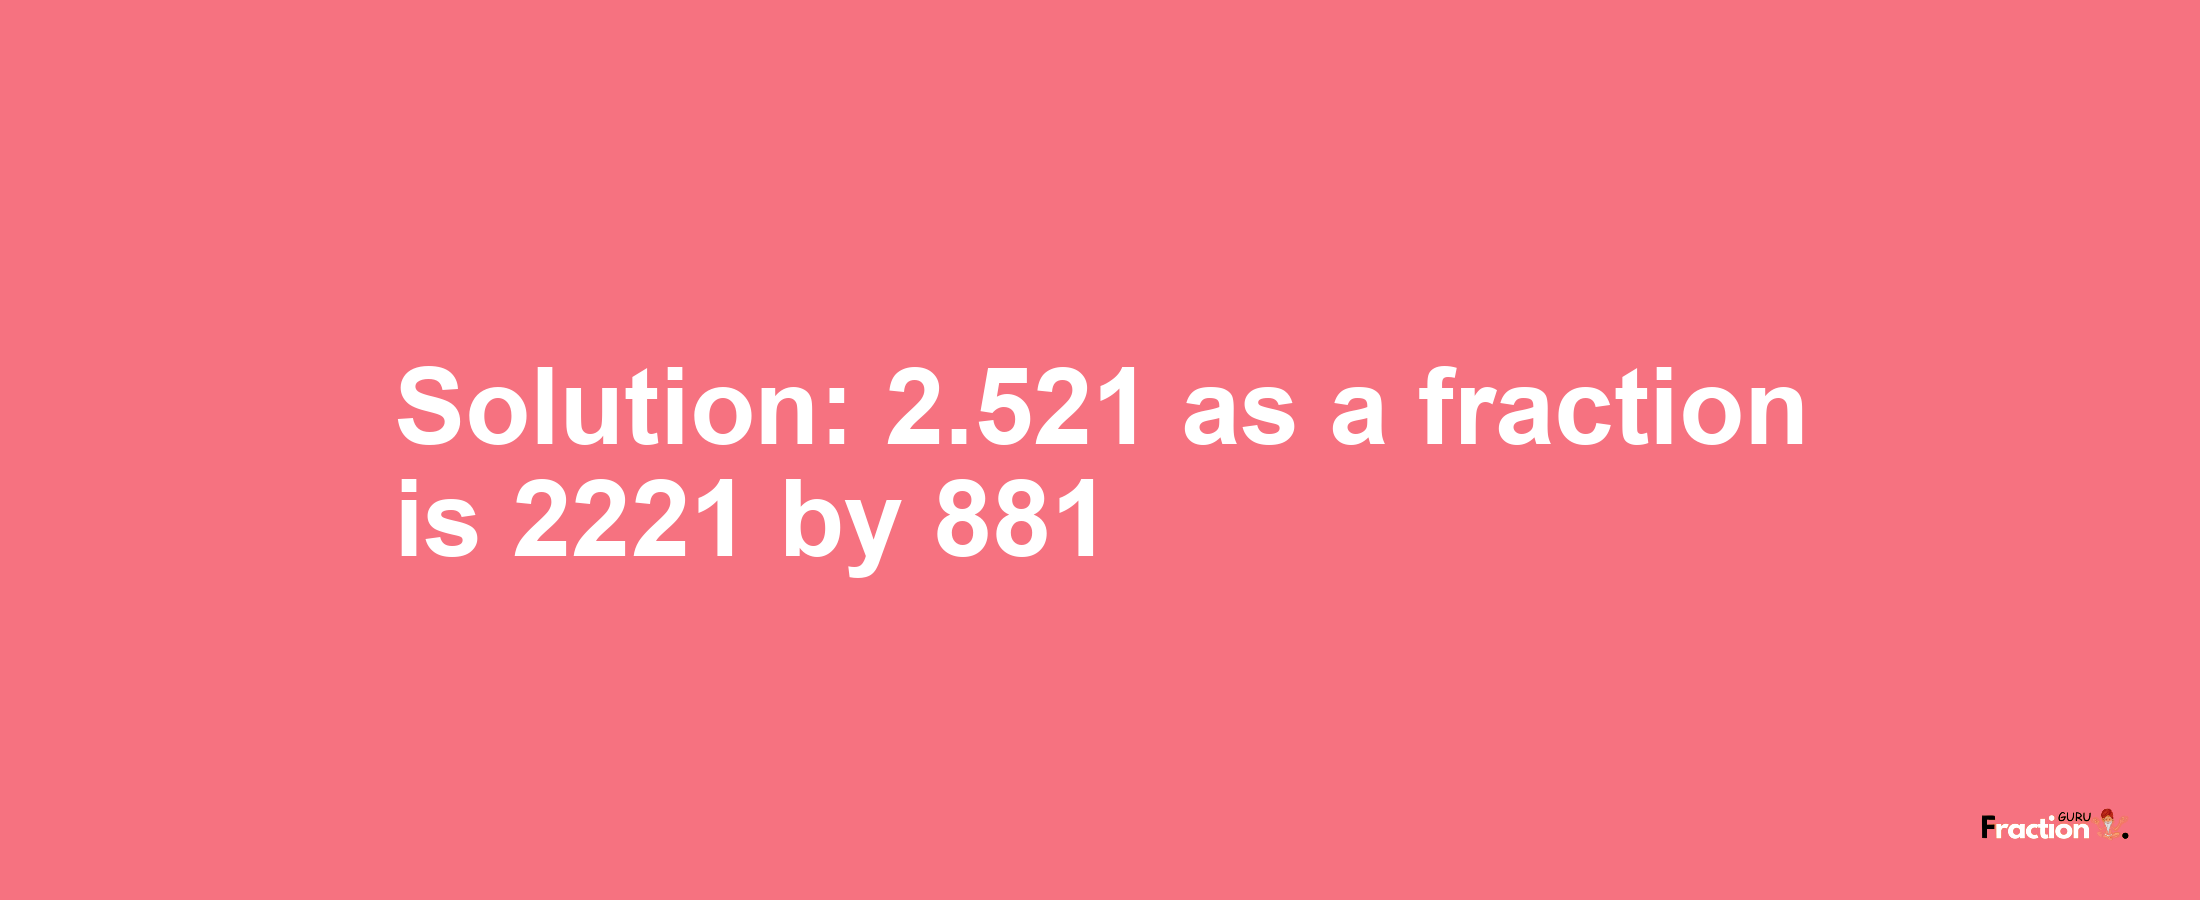 Solution:2.521 as a fraction is 2221/881